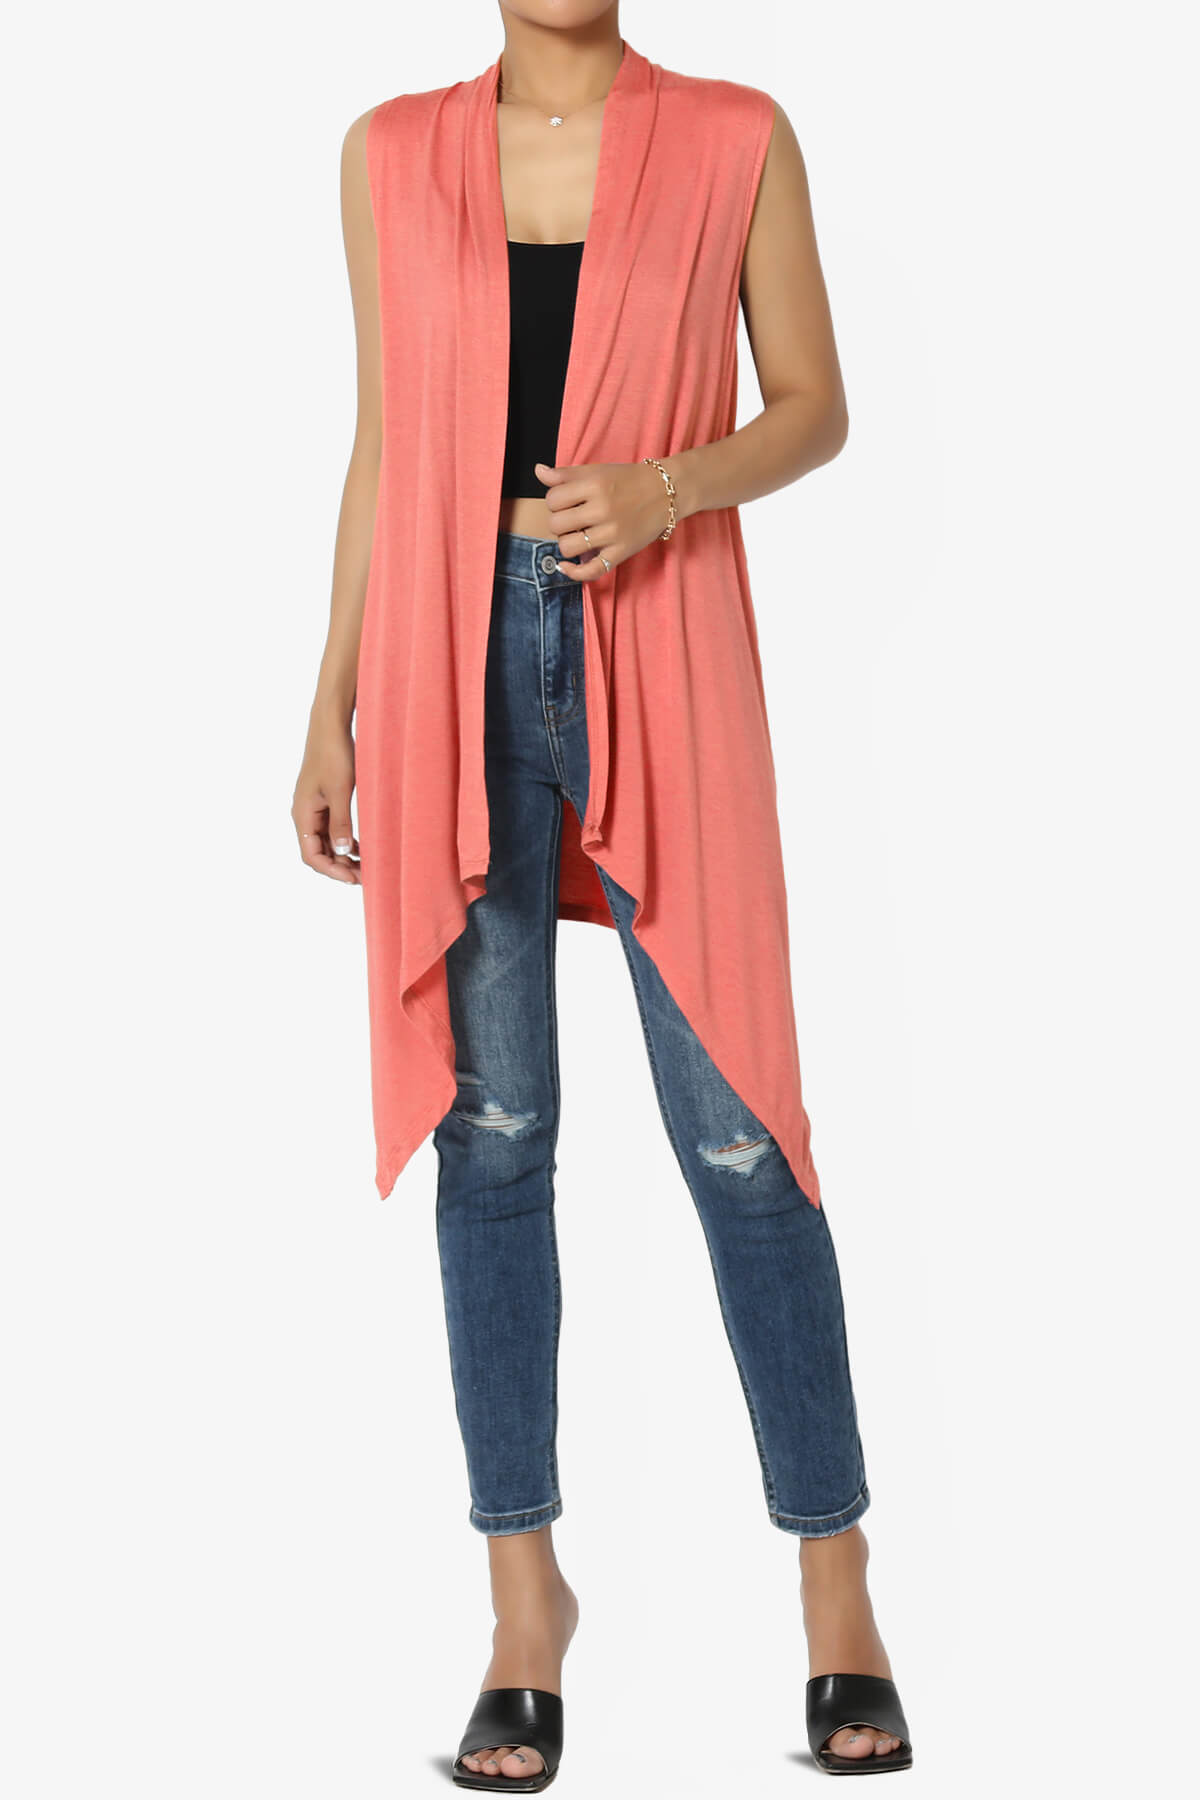 TAYSOM%20DRAPED%20OPEN%20FRONT%20SLEEVELESS%20CARDIGAN%20VEST CORAL_6